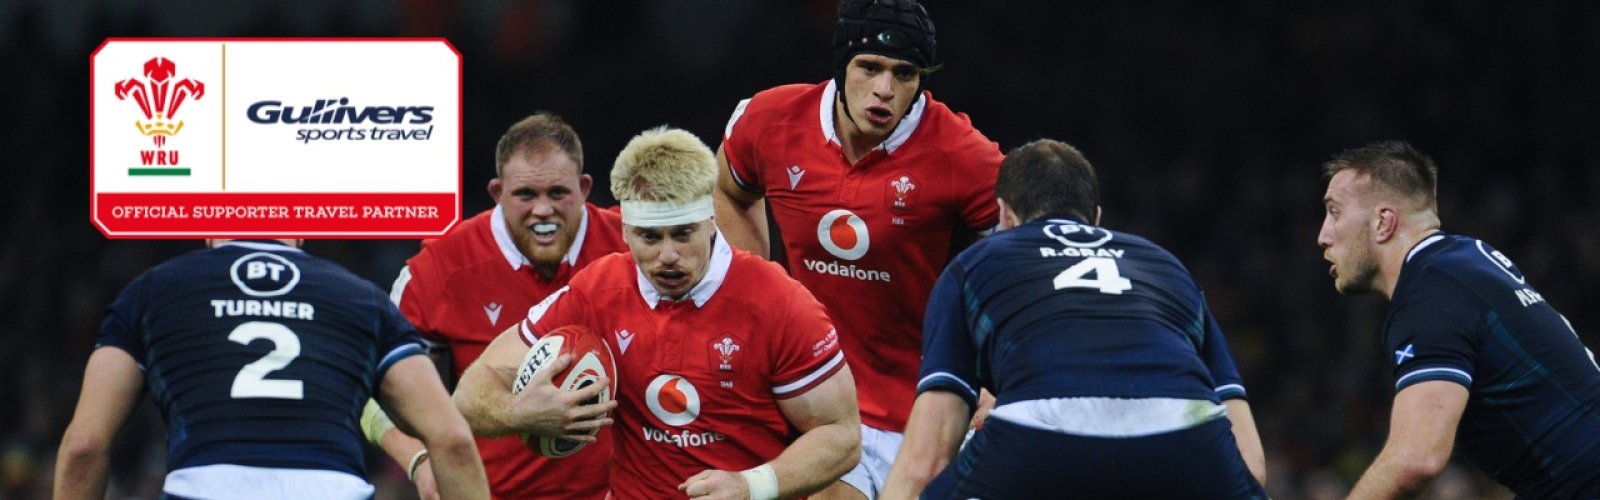 Scotland v Wales Guinness Six Nations ticket packages for Welsh and Scottish rugby supporters